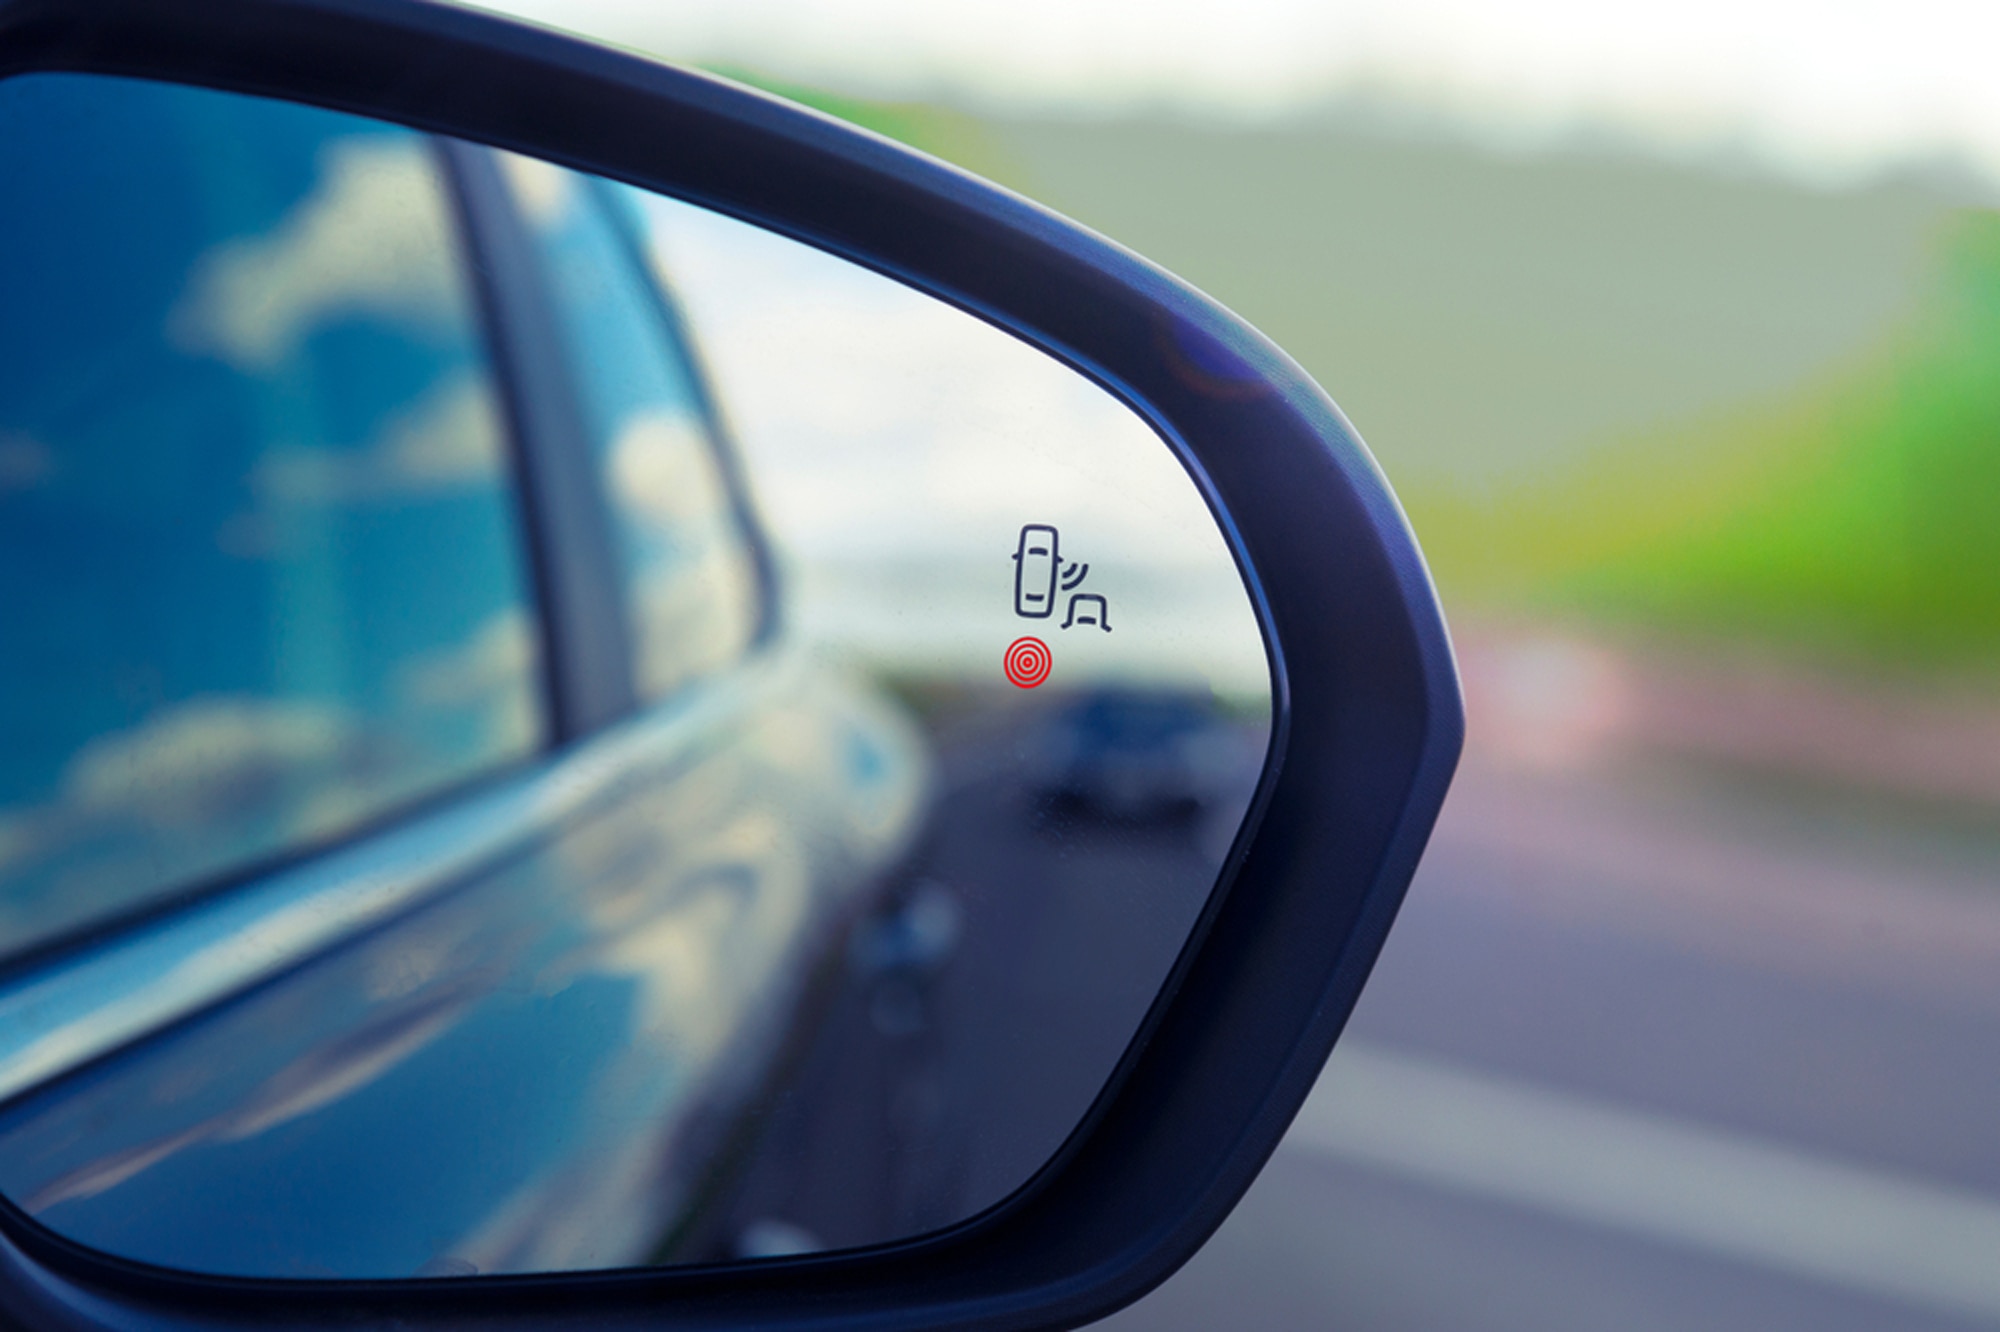 Blind zone monitoring sensor on the side mirror of a modern car